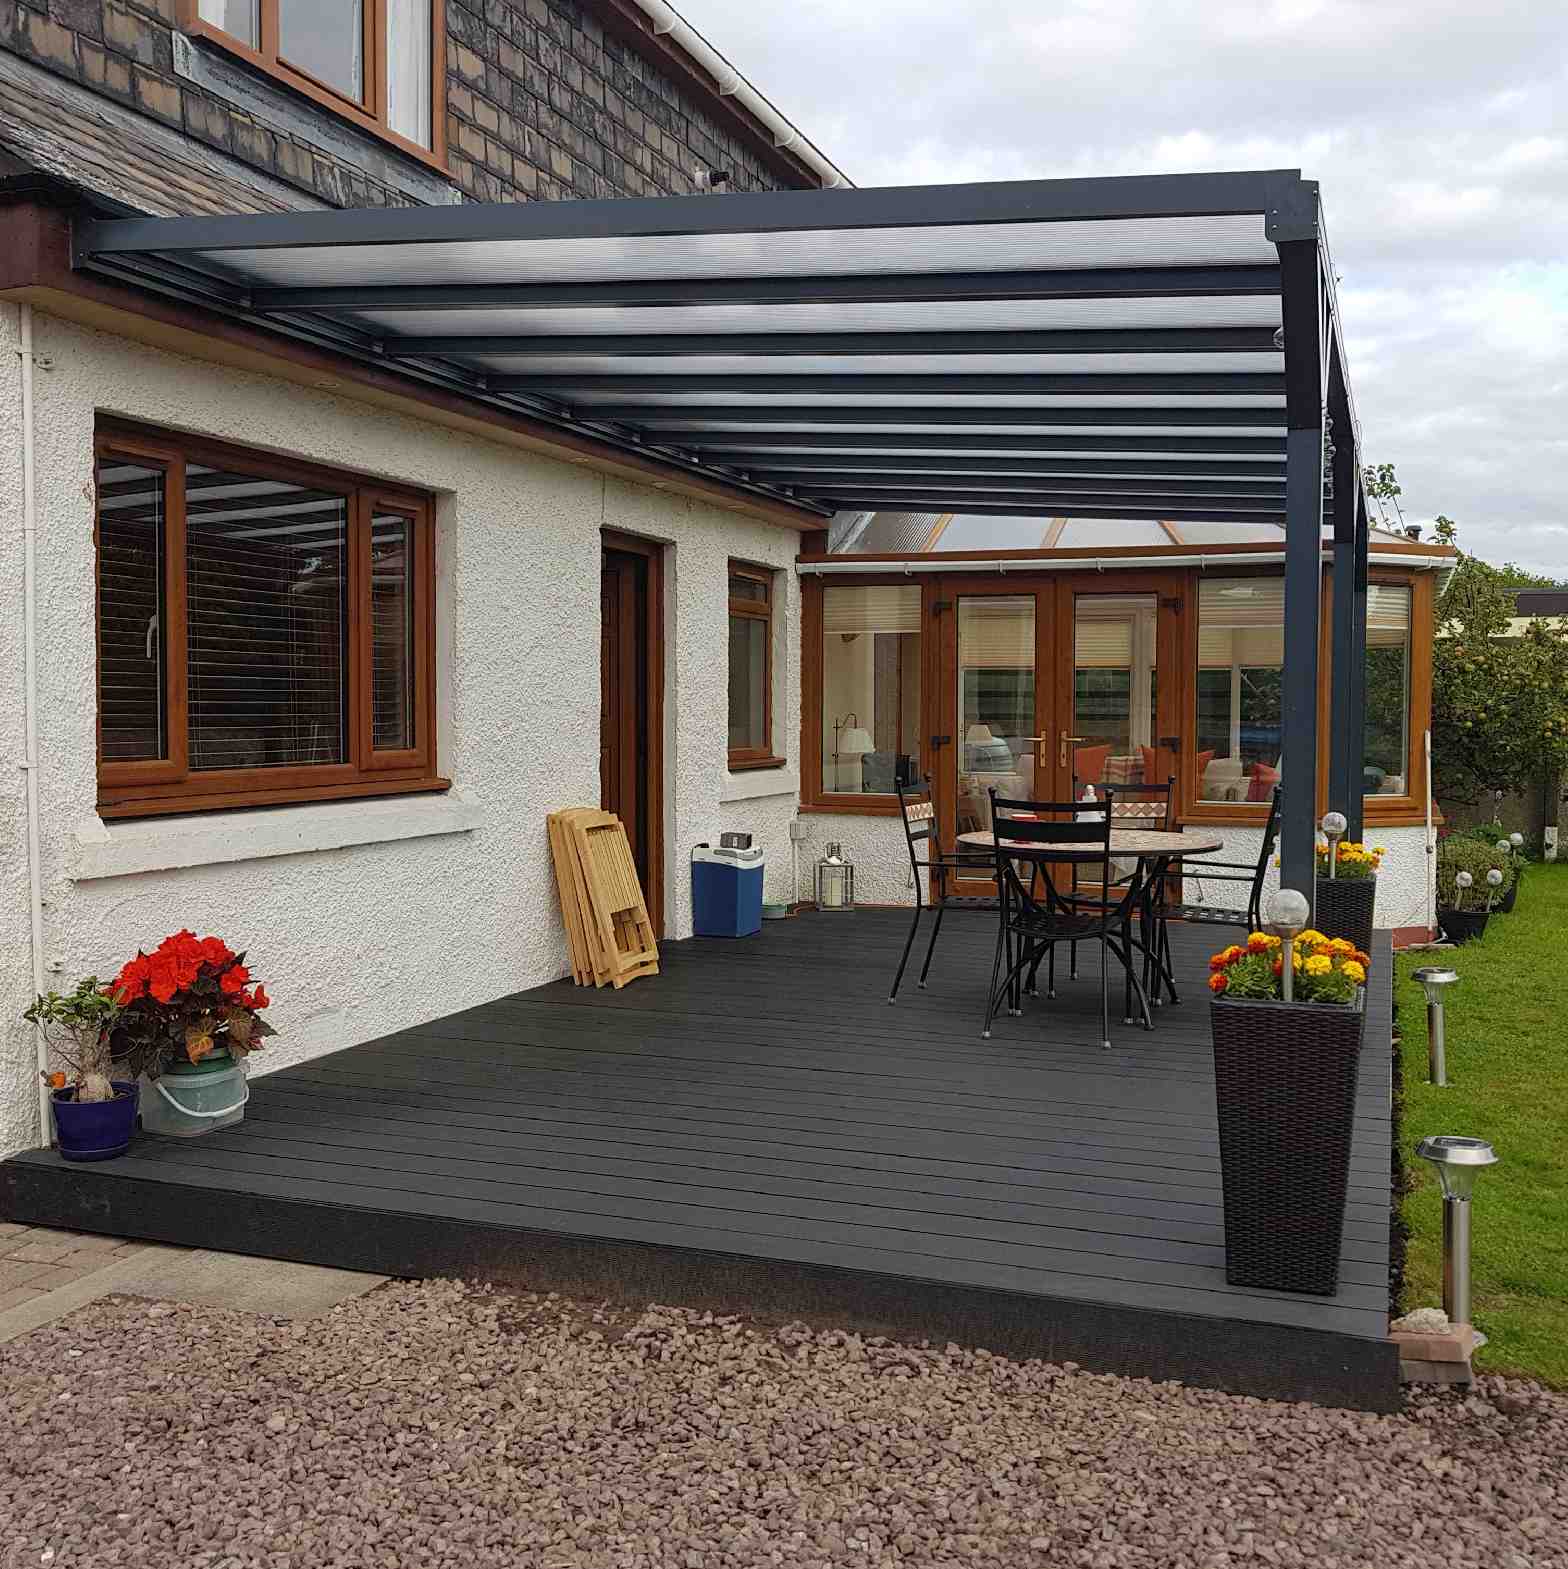 Buy Omega Verandah, Anthracite Grey, 16mm Polycarbonate Glazing - 8.0m (W) x 4.5m (P), (4) Supporting Posts online today